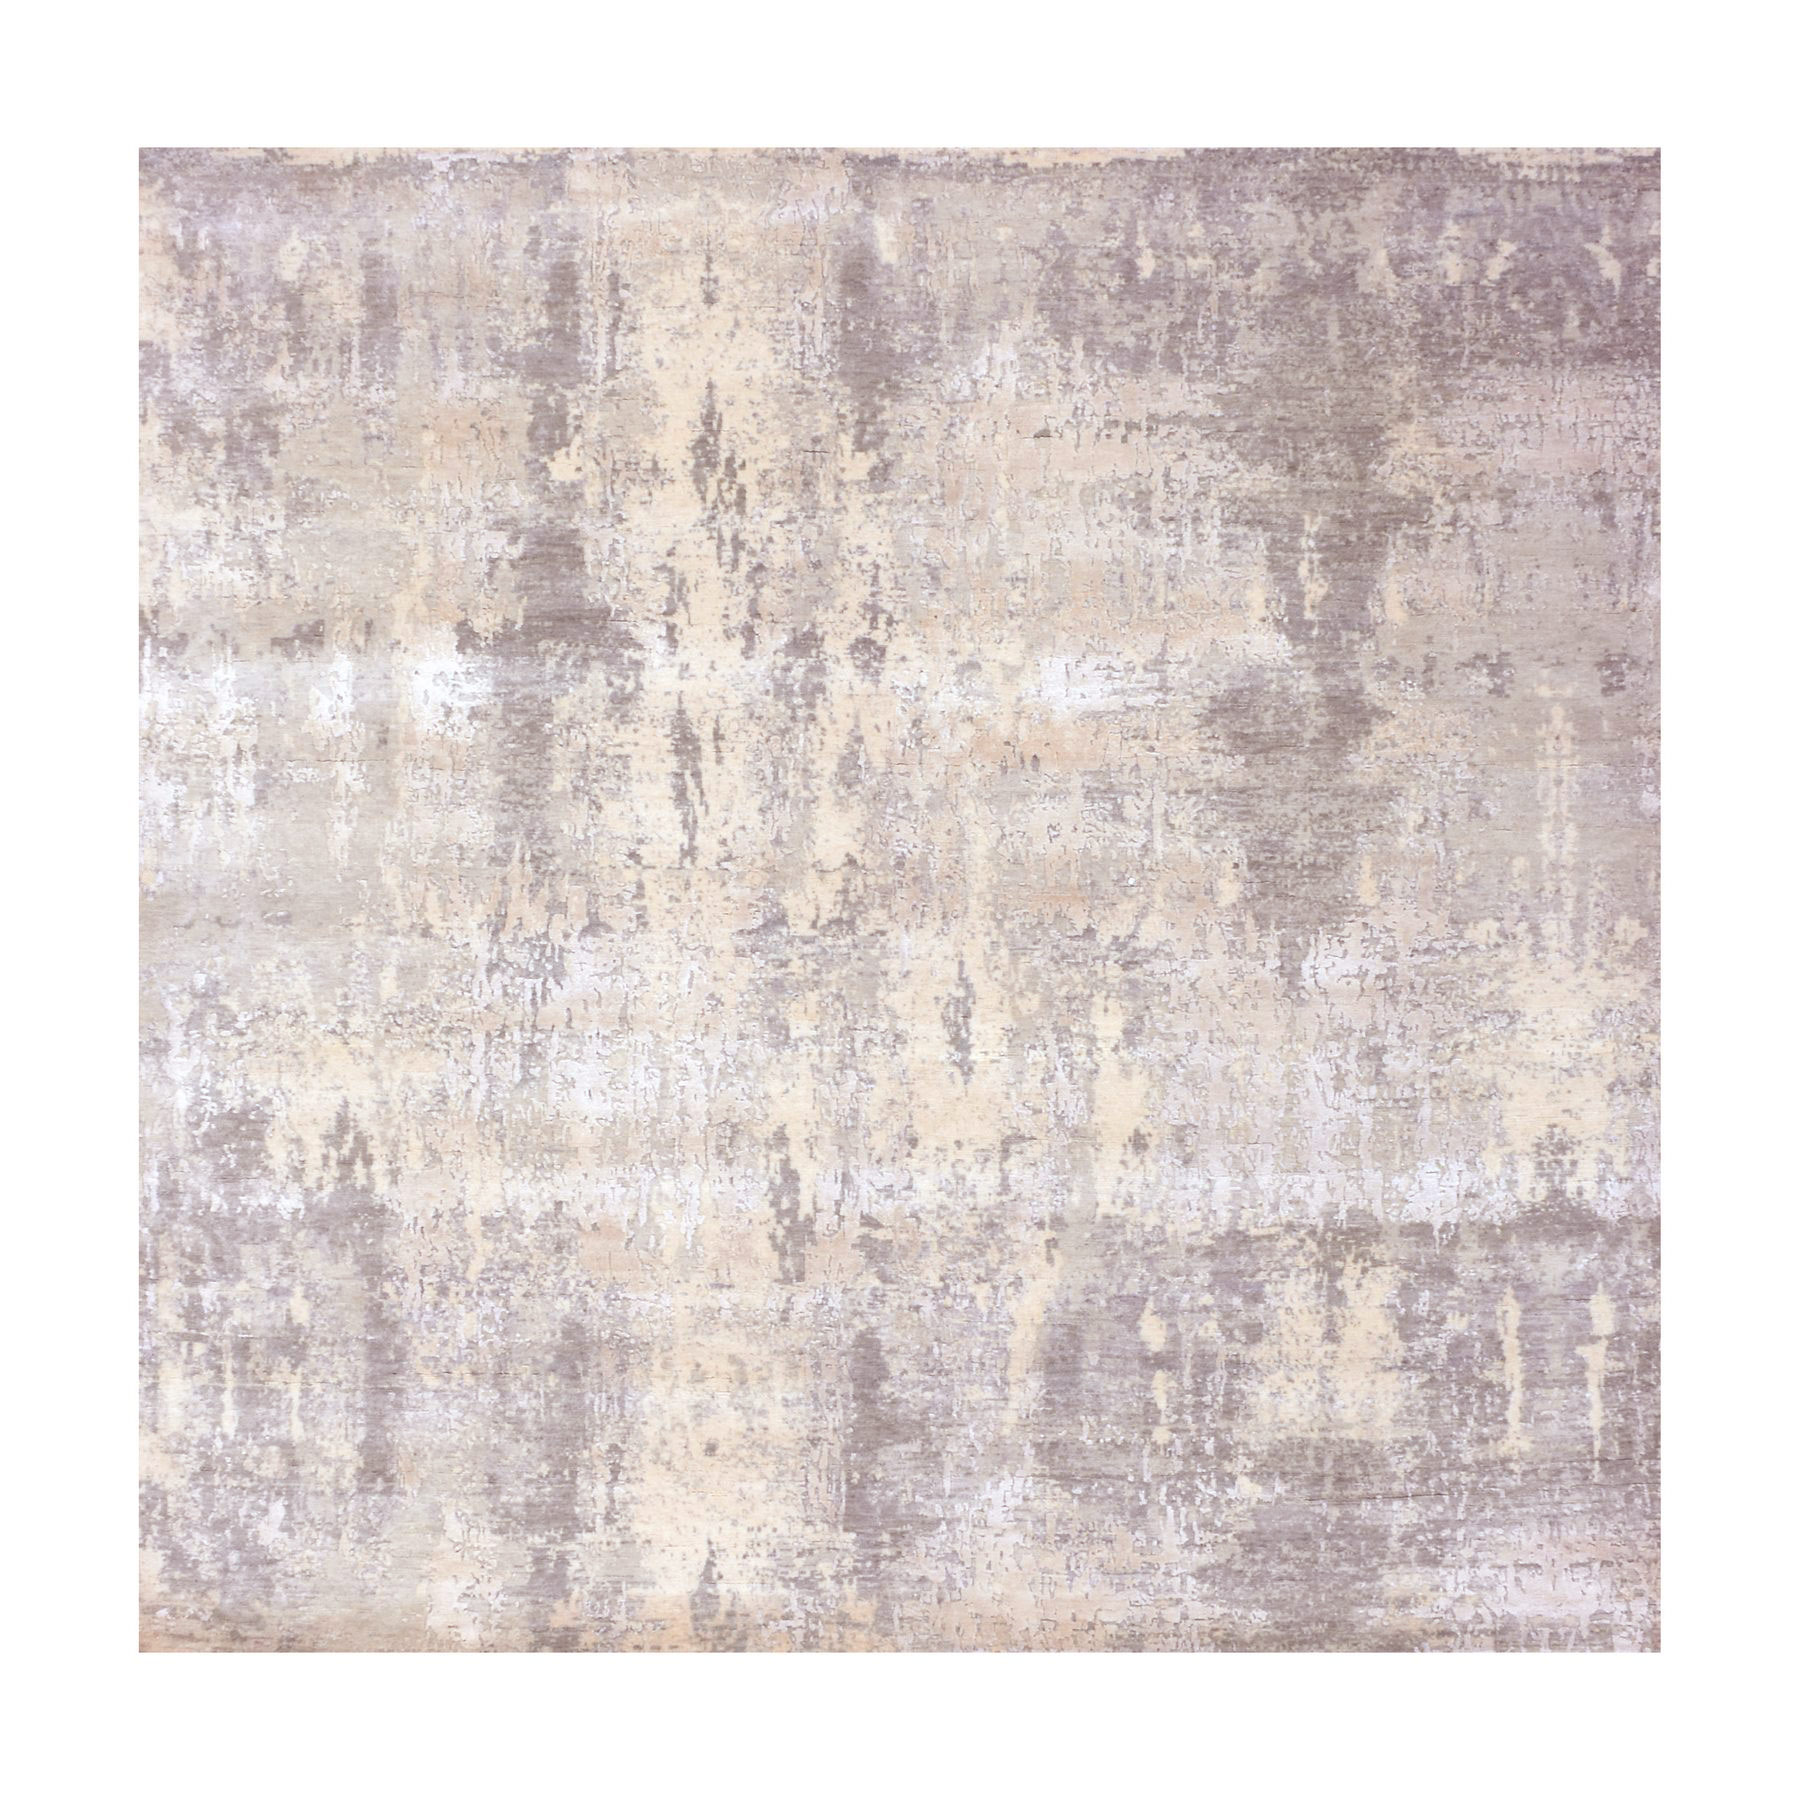 Nickel Gray With Mix Of Agreeable Gray, Soft To The Touch Pile, Hand Knotted, Modern and Abstract Design, Wool and Silk Oriental Square Rug